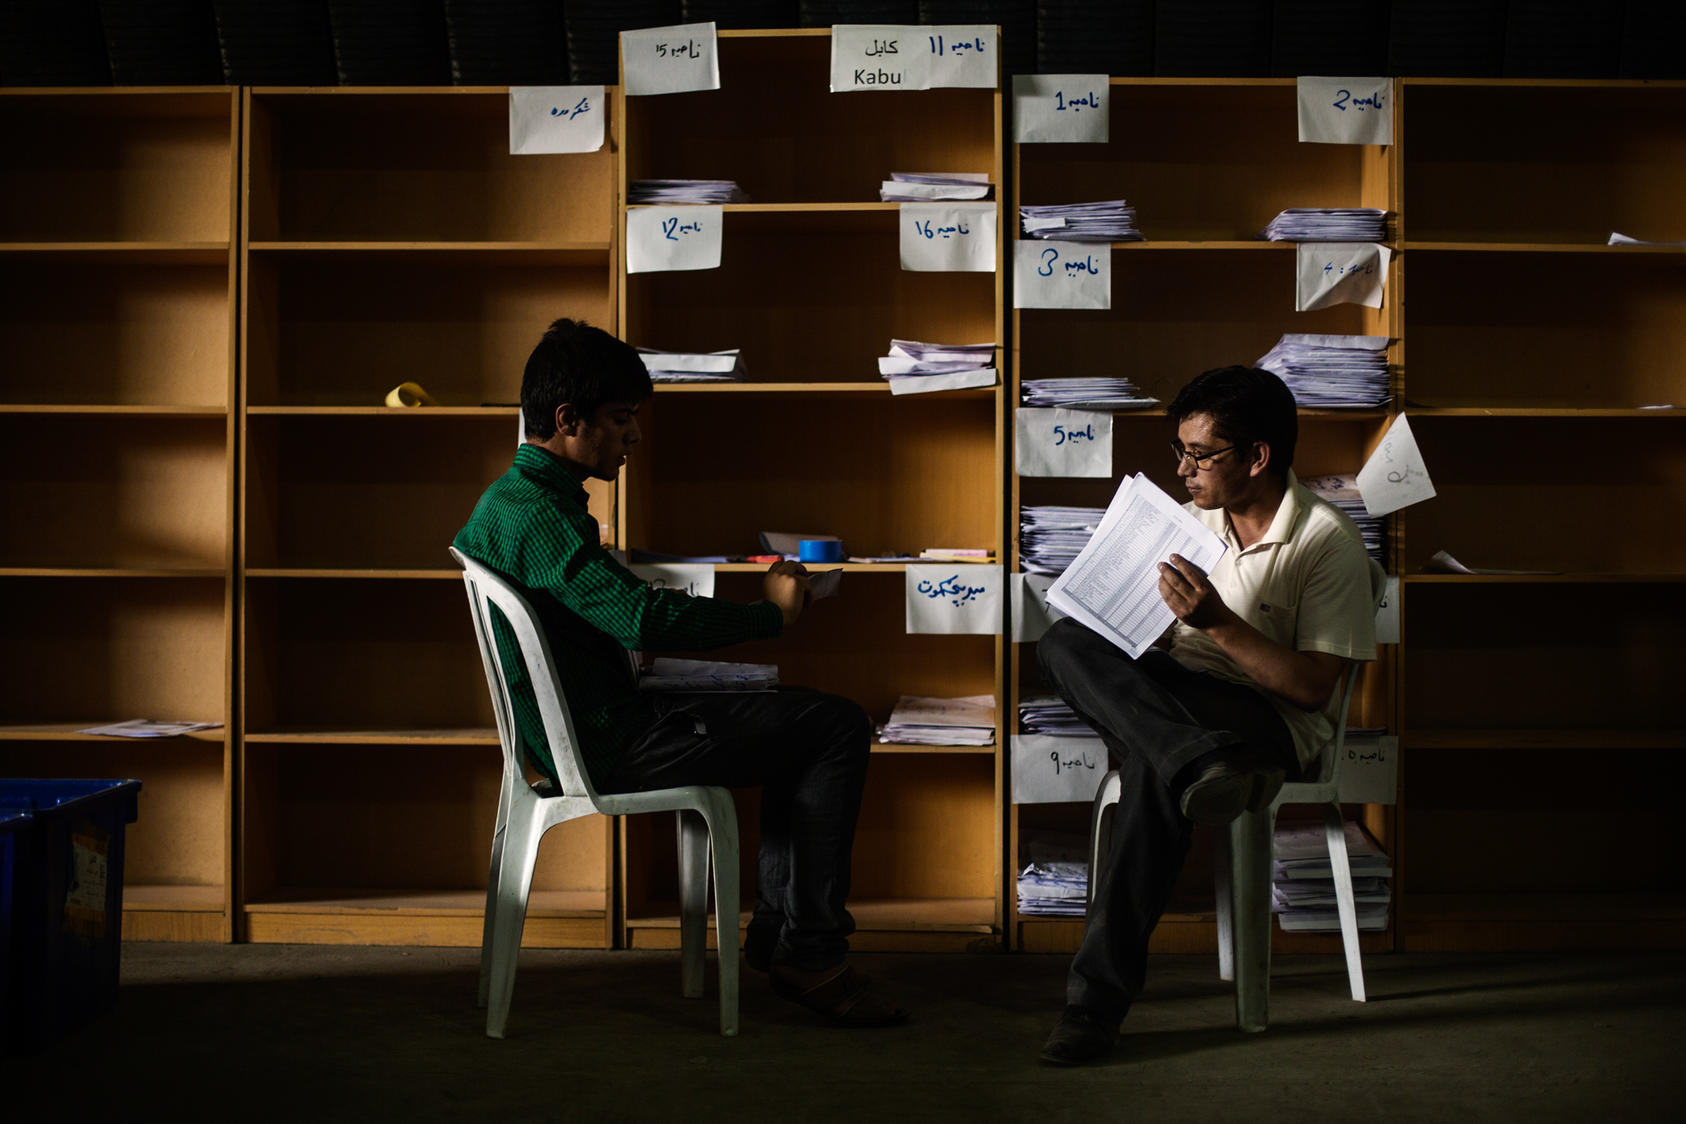 Independent Election Commission workers audit ballots from the disputed presidential runoff, in Kabul, Afghanistan, July 17, 2014. United Nations officials and international diplomats are monitoring the process, as well as representatives of the two candidates, Ashraf Ghani and Abdullah Abdullah. (Diego Ibarra Sanchez/The New York Times)